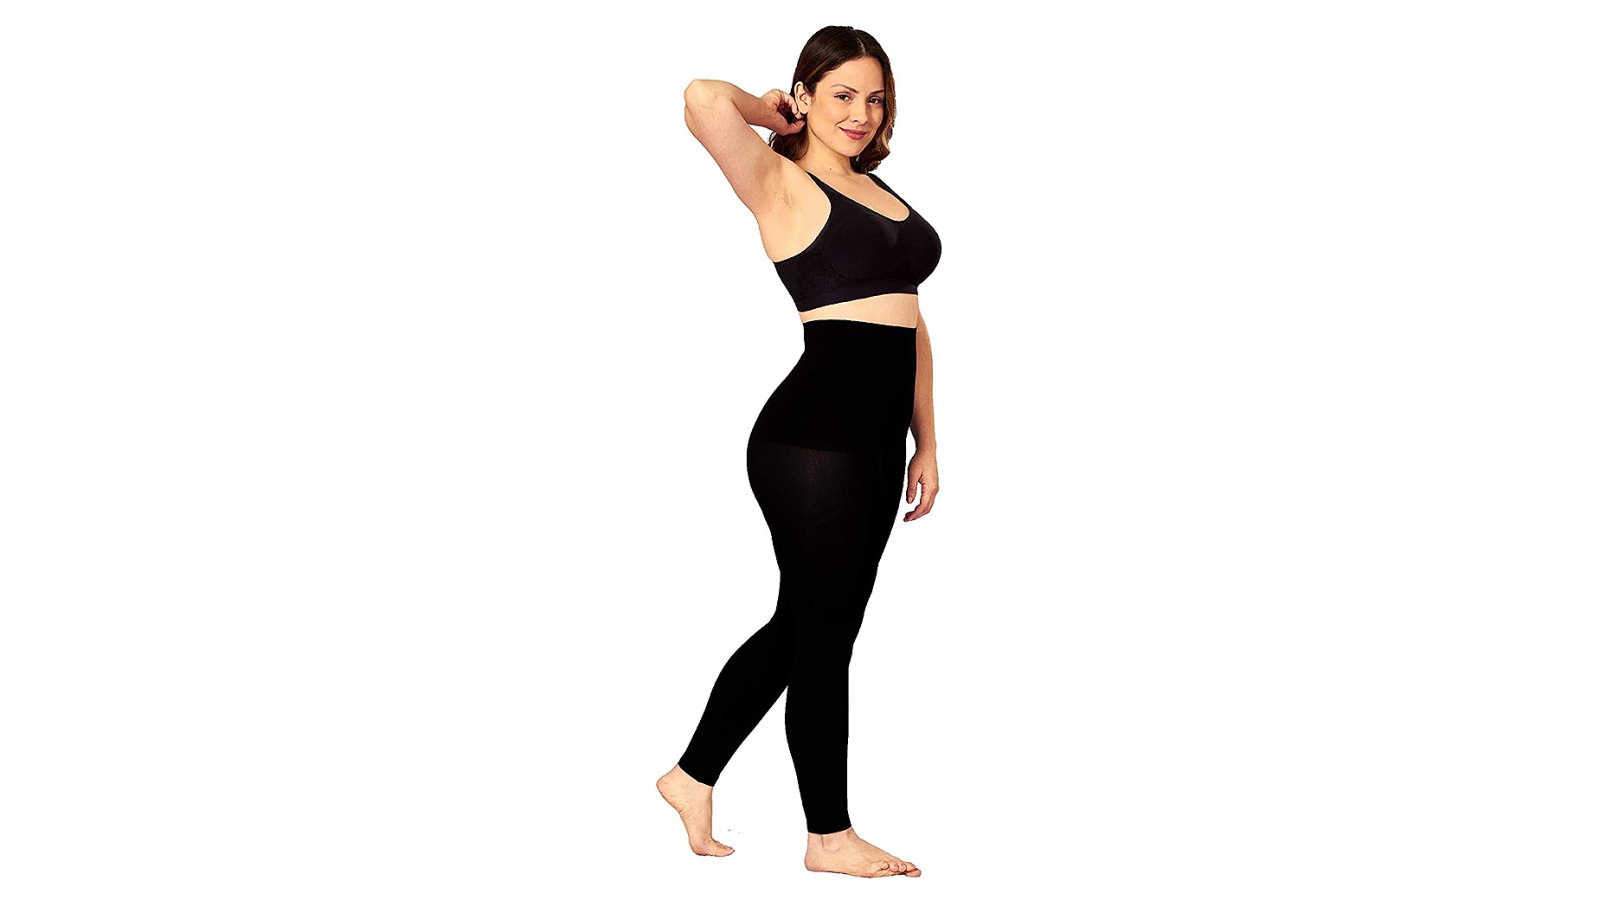 The Gym People Athletic Joggers are a tummy-tucking lounge pant